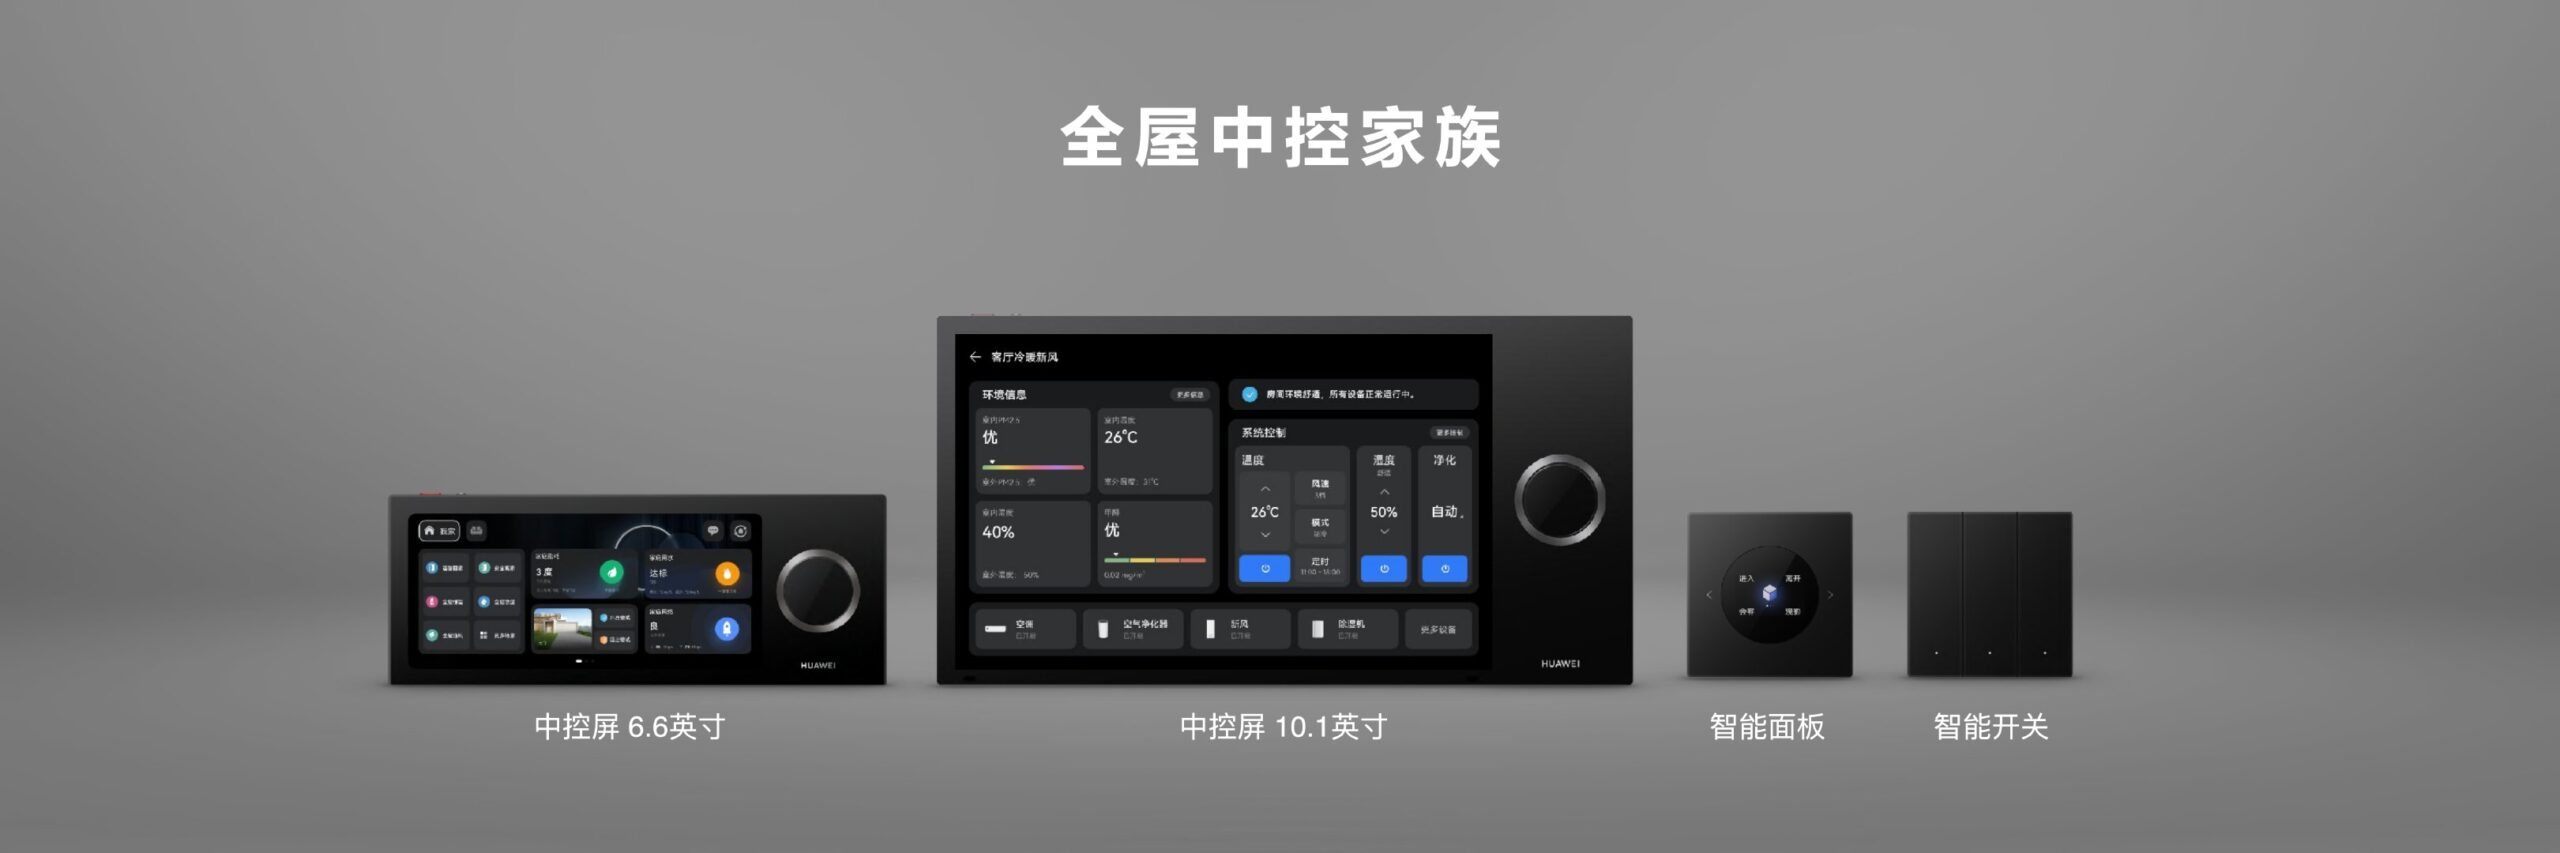 Huawei whole house intelligent central control system-8